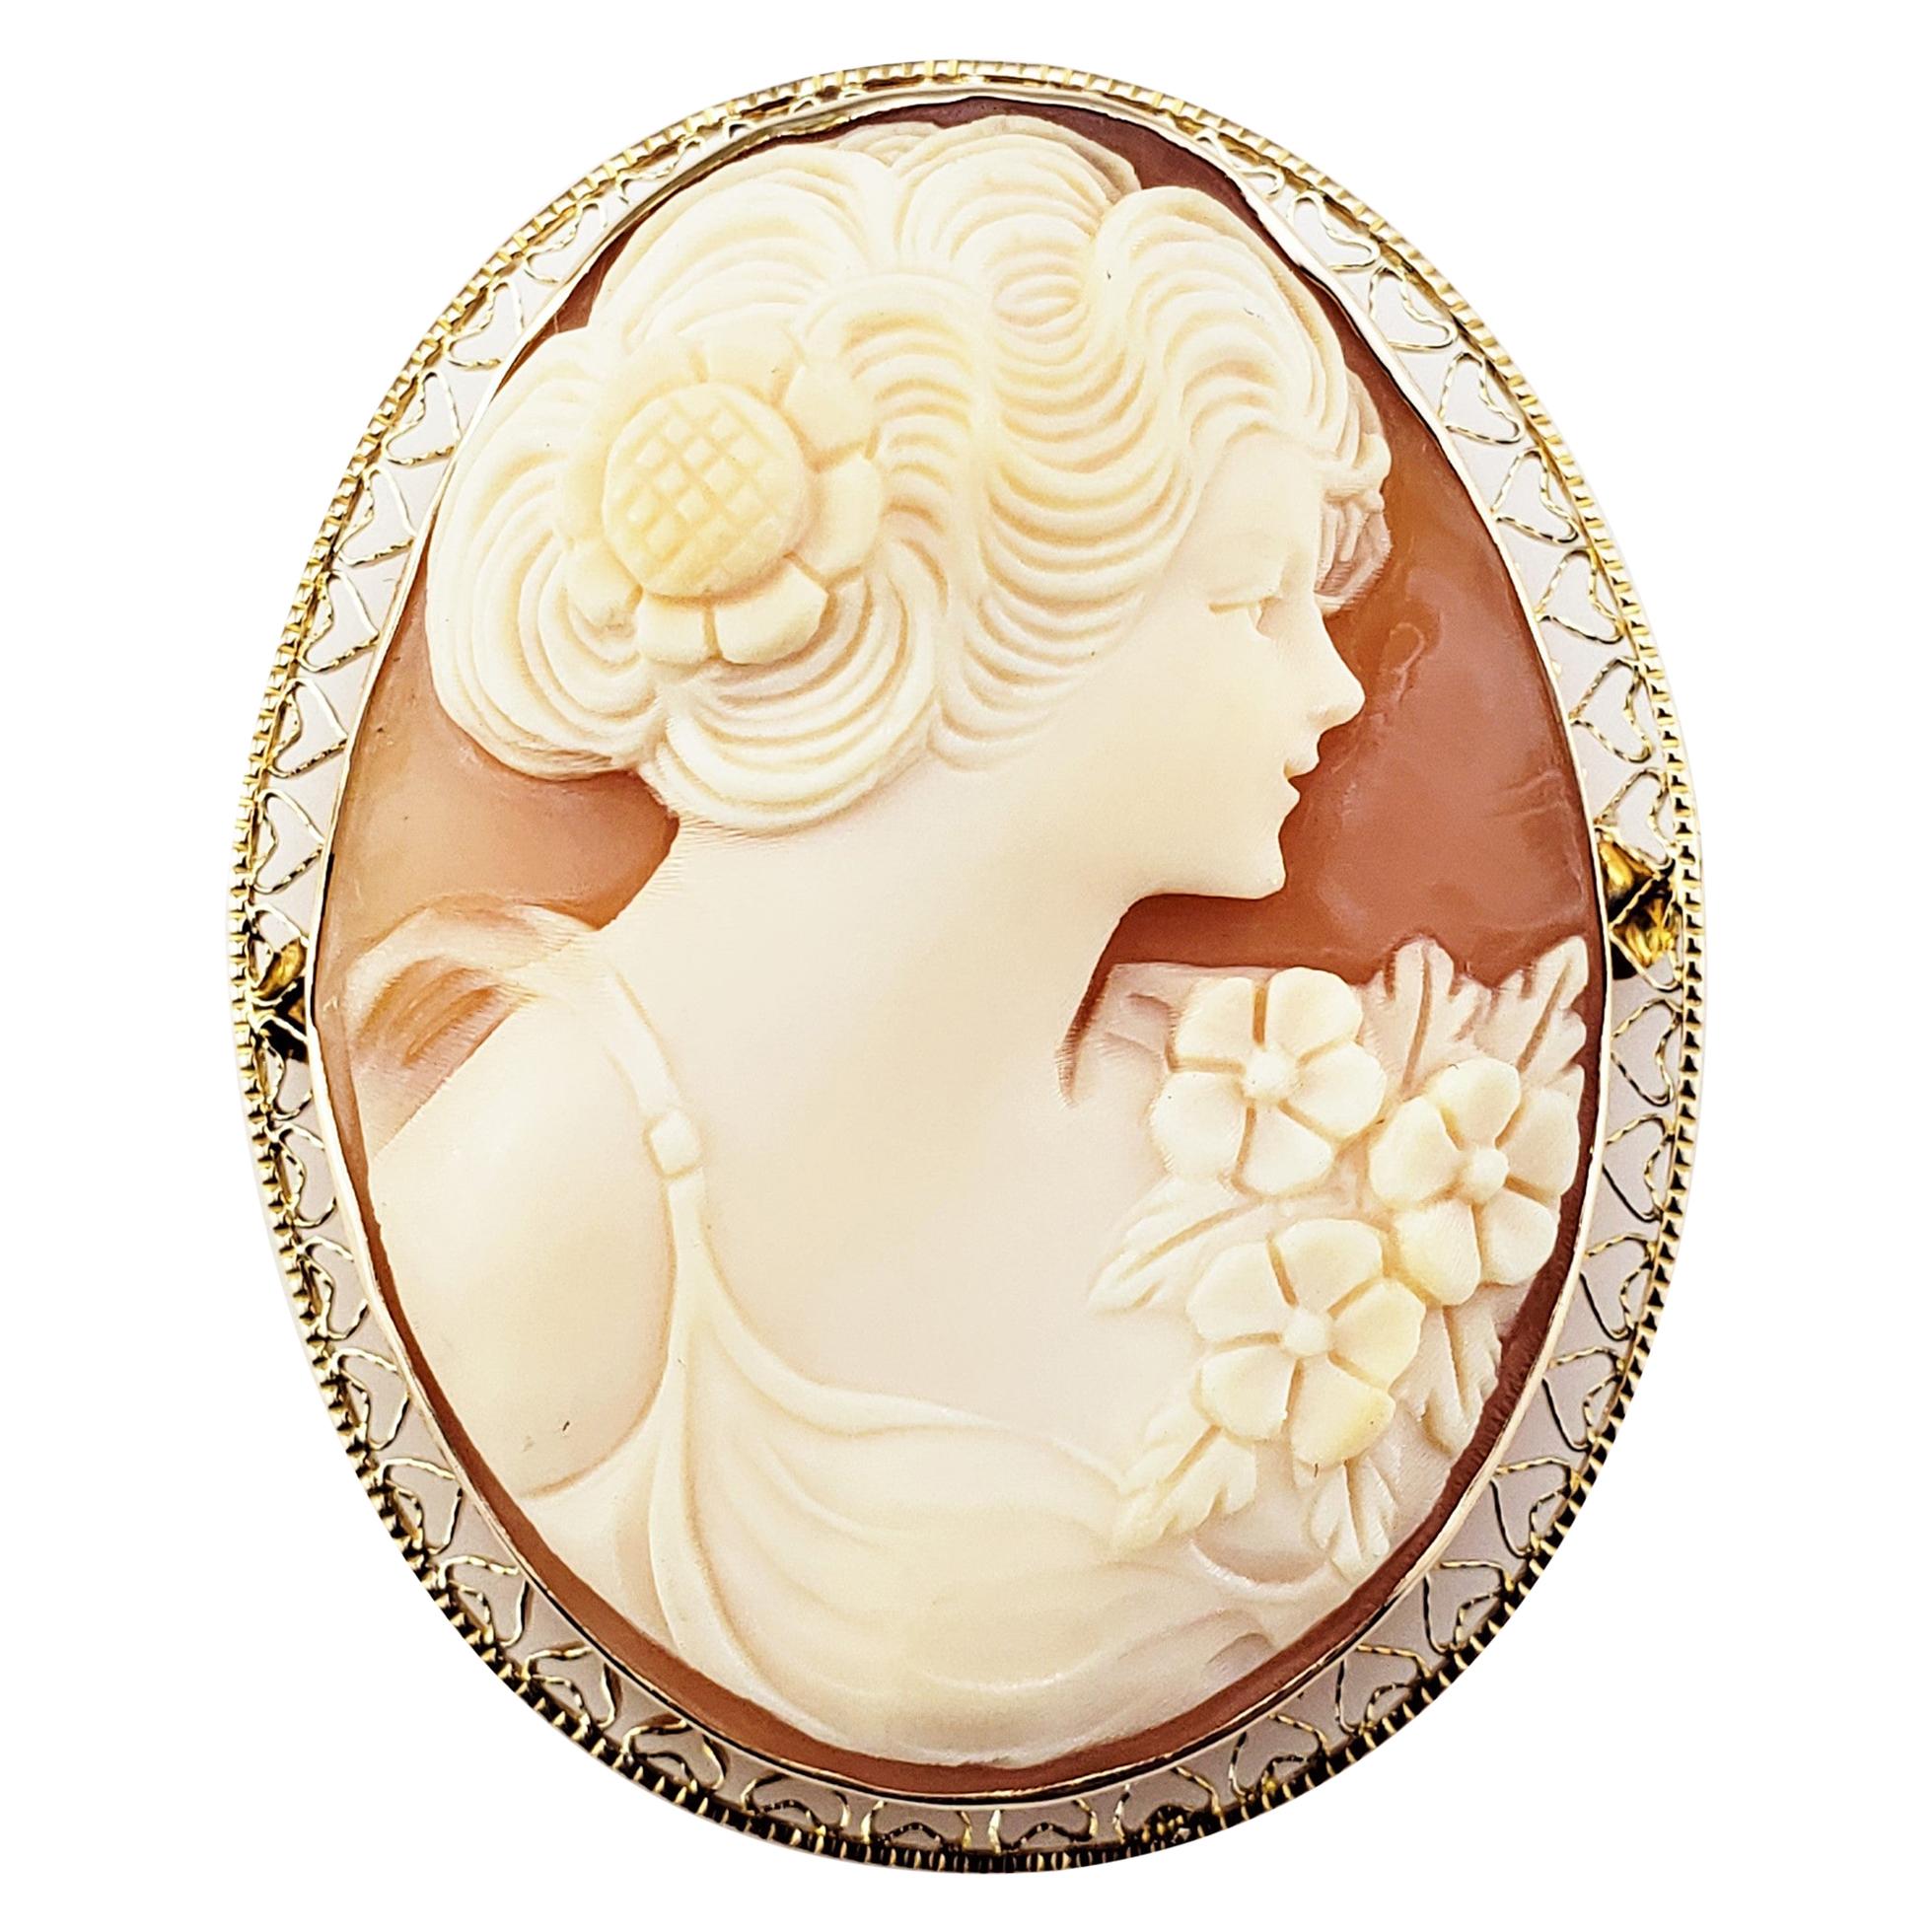 10 Karat Yellow Gold Cameo Brooch/Pin-

This elegant cameo features a lovely lady in profile framed in beautifully detailed 10K yellow gold.

Size:  39 mm x  32 mm

Weight:  4.9 dwt. /  7.7 gr.

Stamped: 10K

Very good condition, professionally